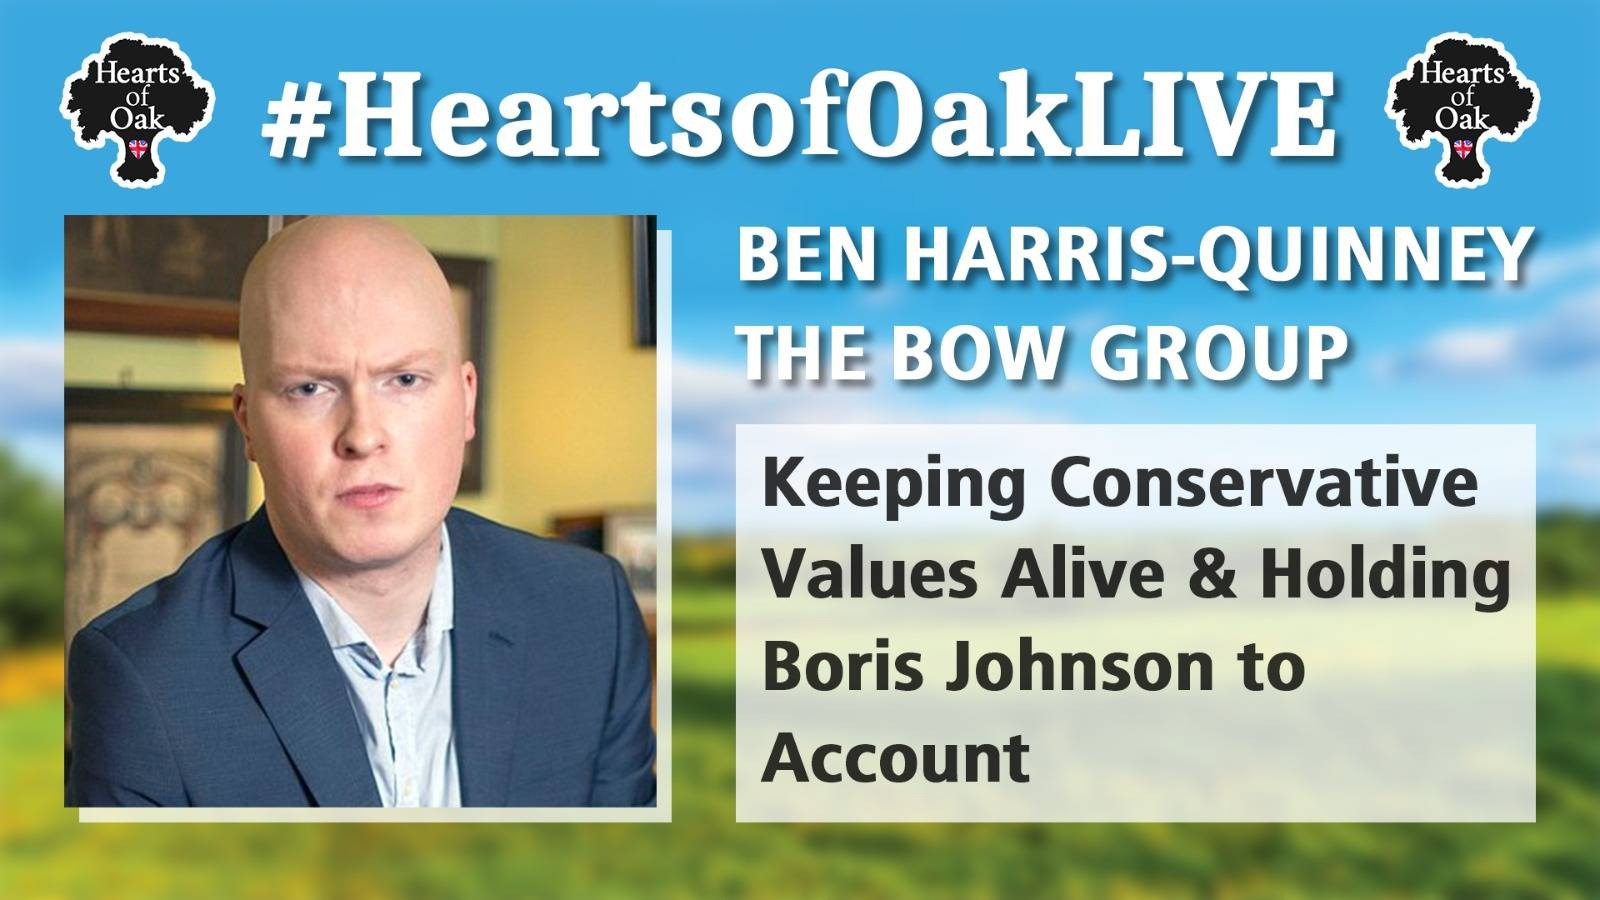 Ben Harris-Quinney - Keeping Conservative Values Alive & Holding Boris Johnson to Account